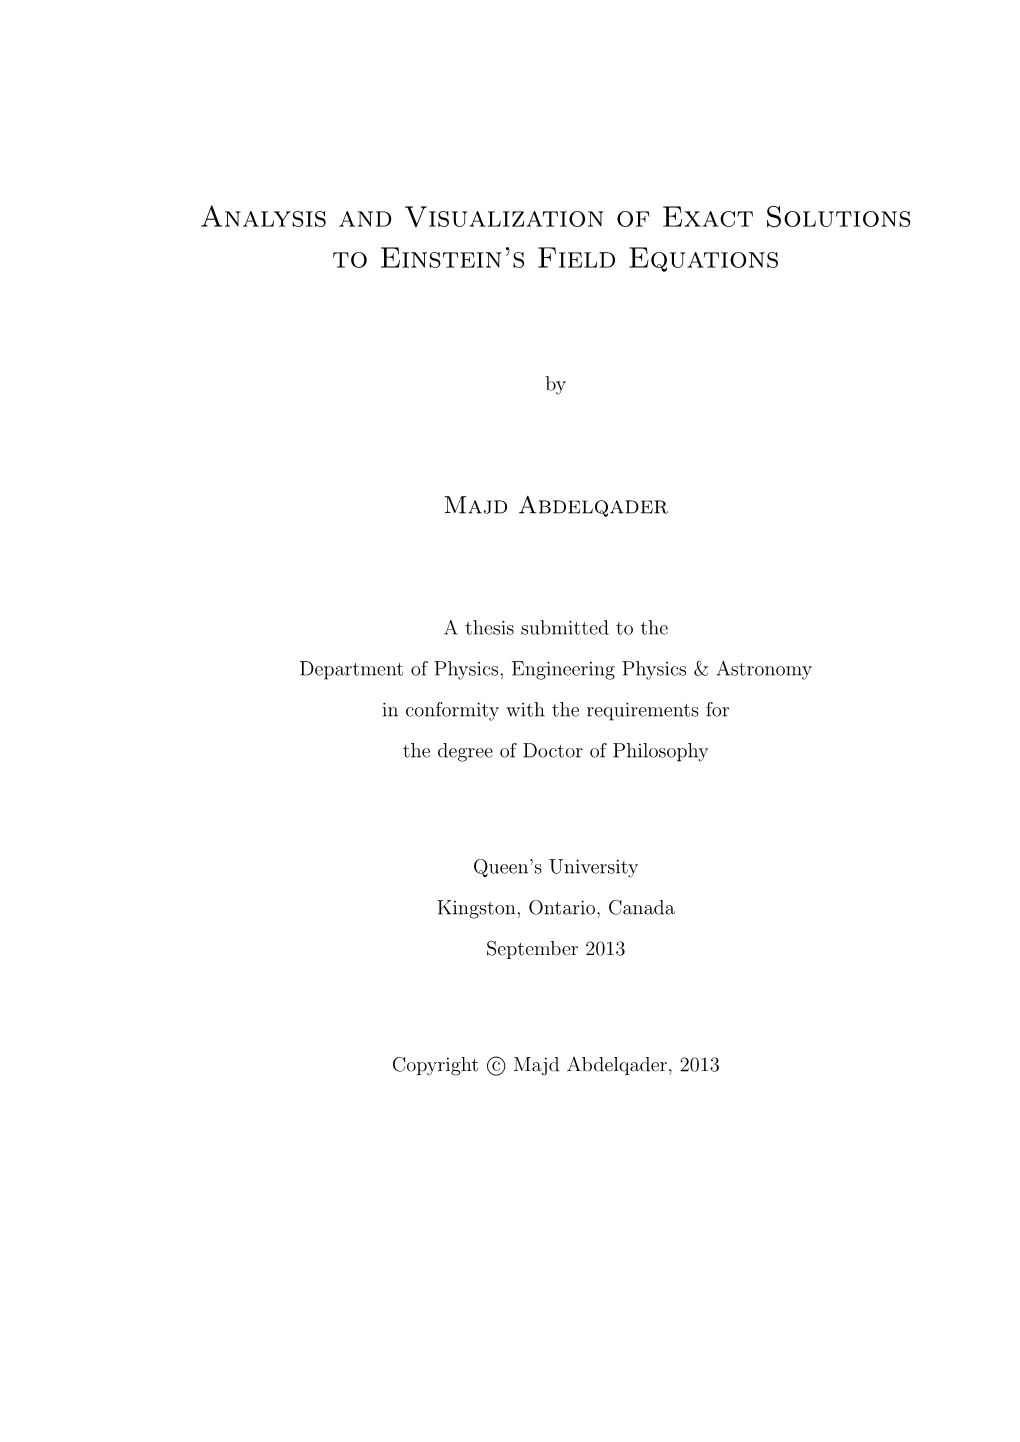 Analysis and Visualization of Exact Solutions to Einstein's Field Equations